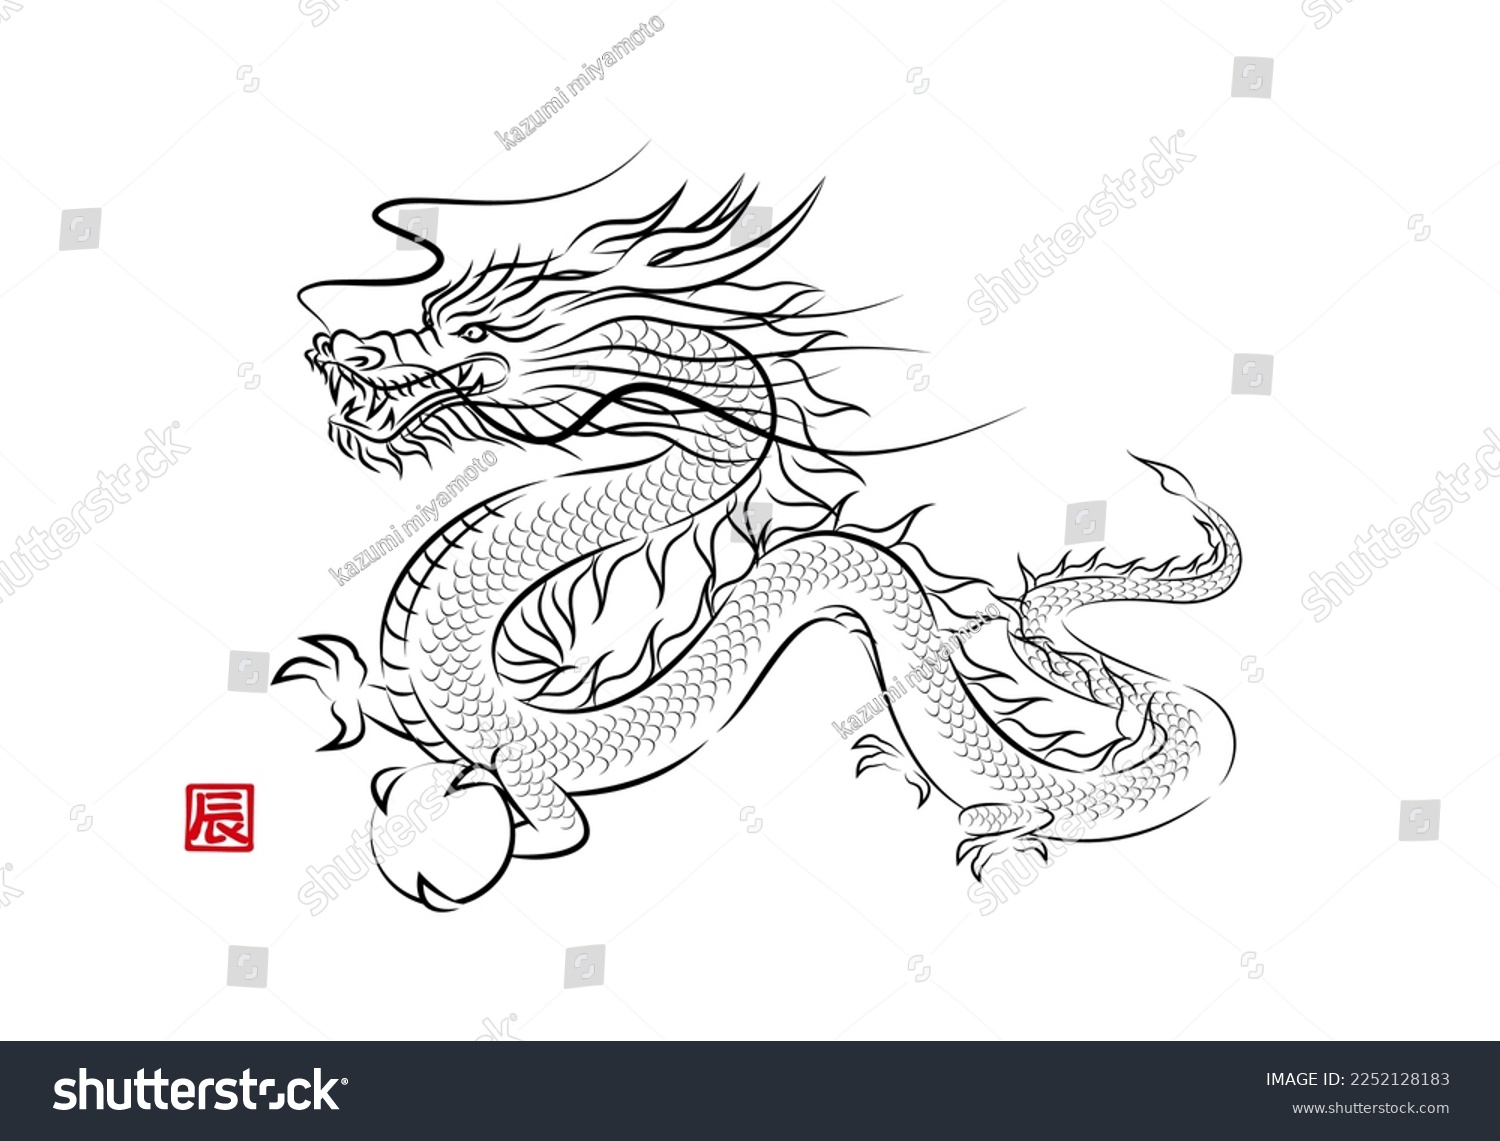 SVG of Stylish ink painting style illustration of a divine dragon flying with a dragon ball. Year of the Dragon New Year card material vector.
辰 means 